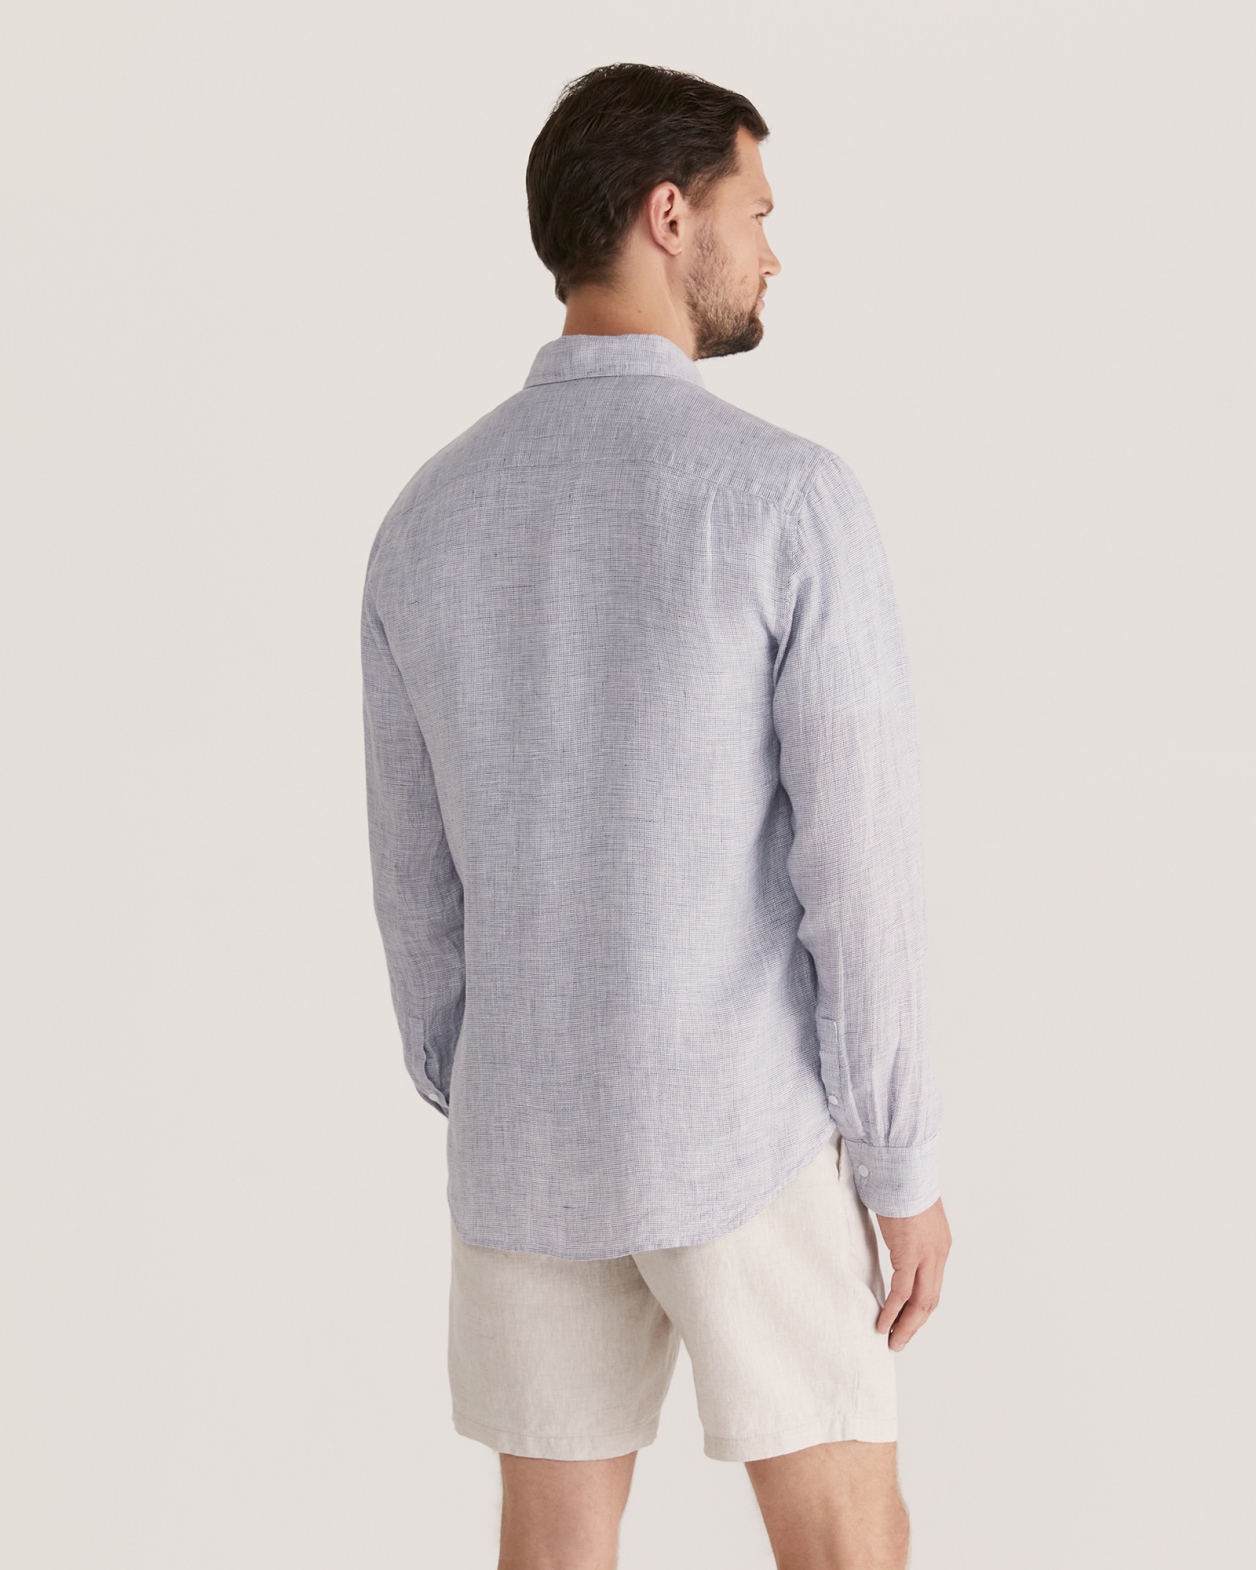 Anderson Classic Yarn Dyed Linen Shirt in STORM BLUE